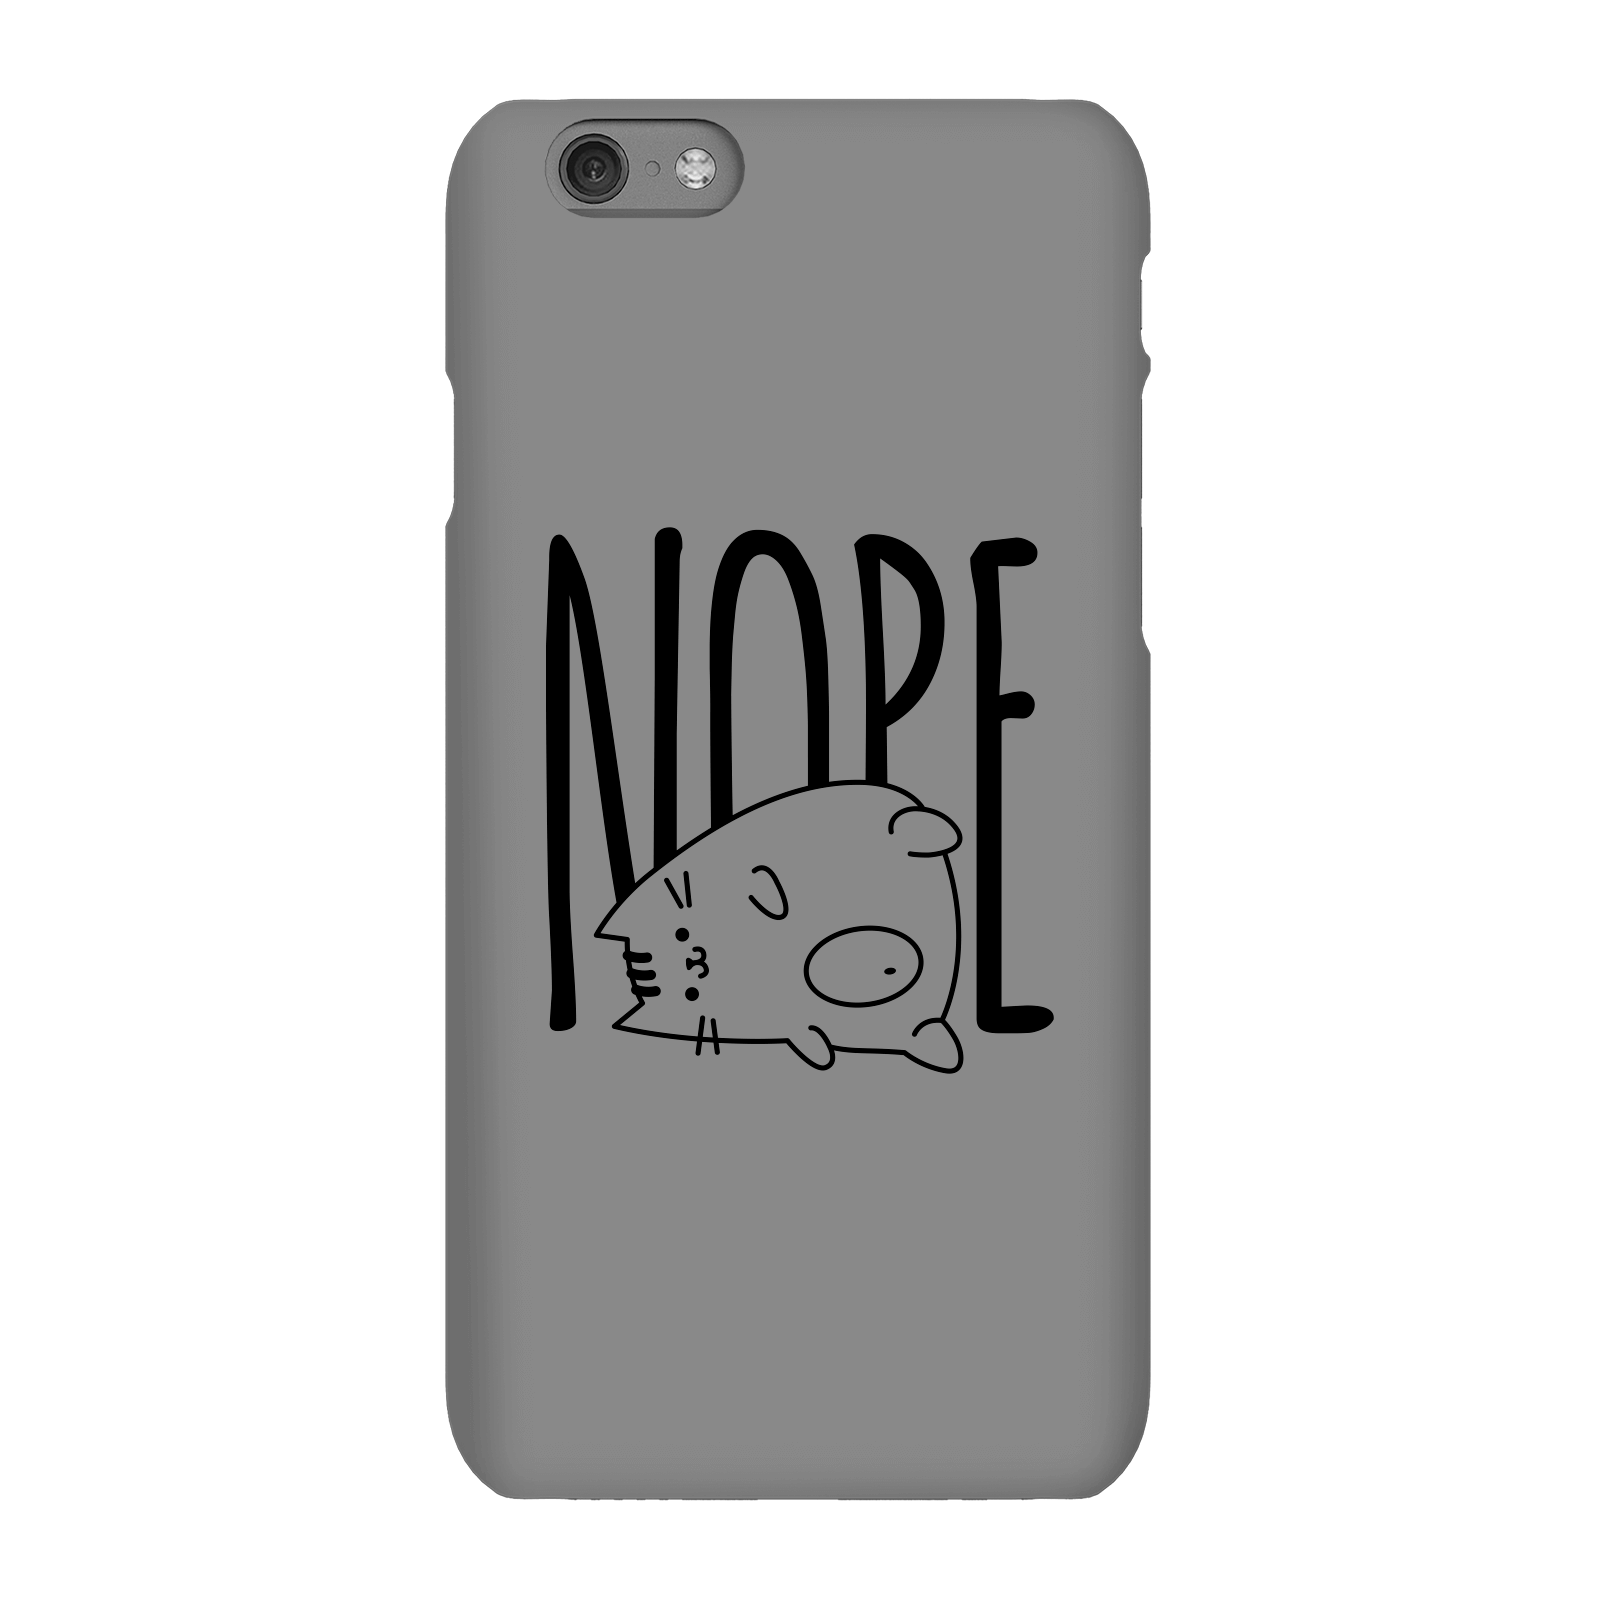 Nope Phone Case for iPhone and Android - iPhone 6S - Snap Case - Gloss